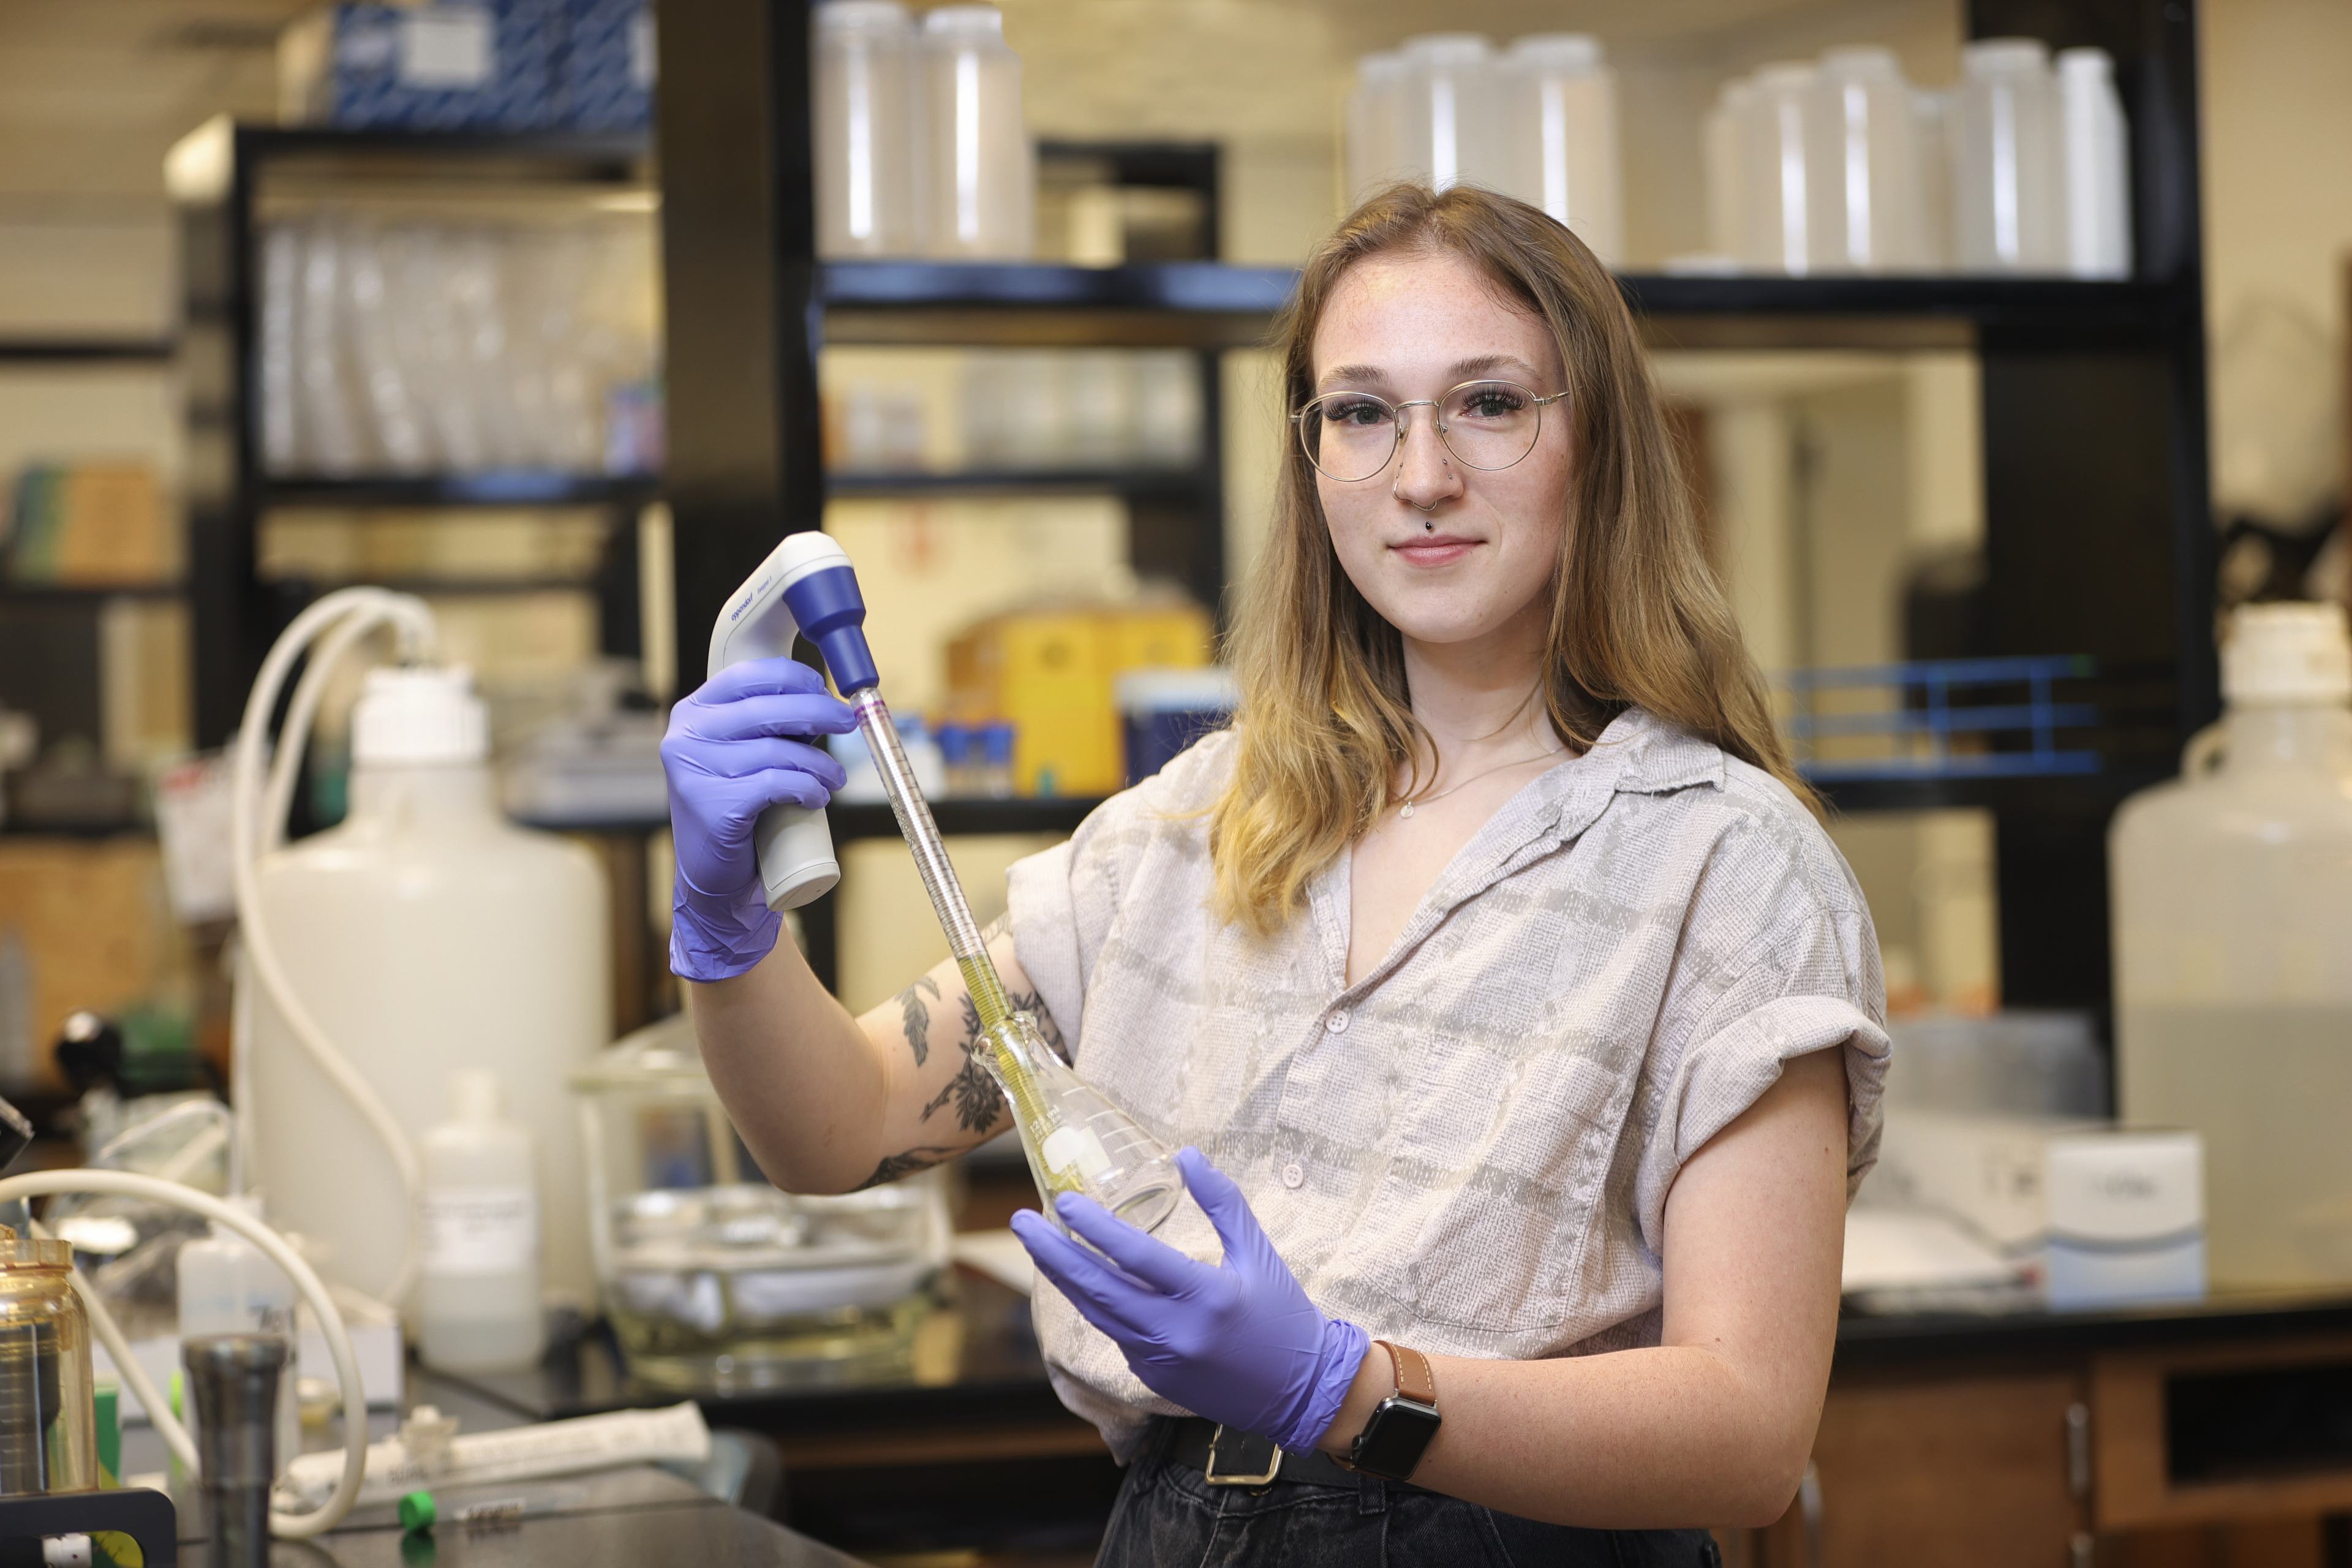 student, Kate Brown, holding a beaker and other testing equipment while wearing purple gloves